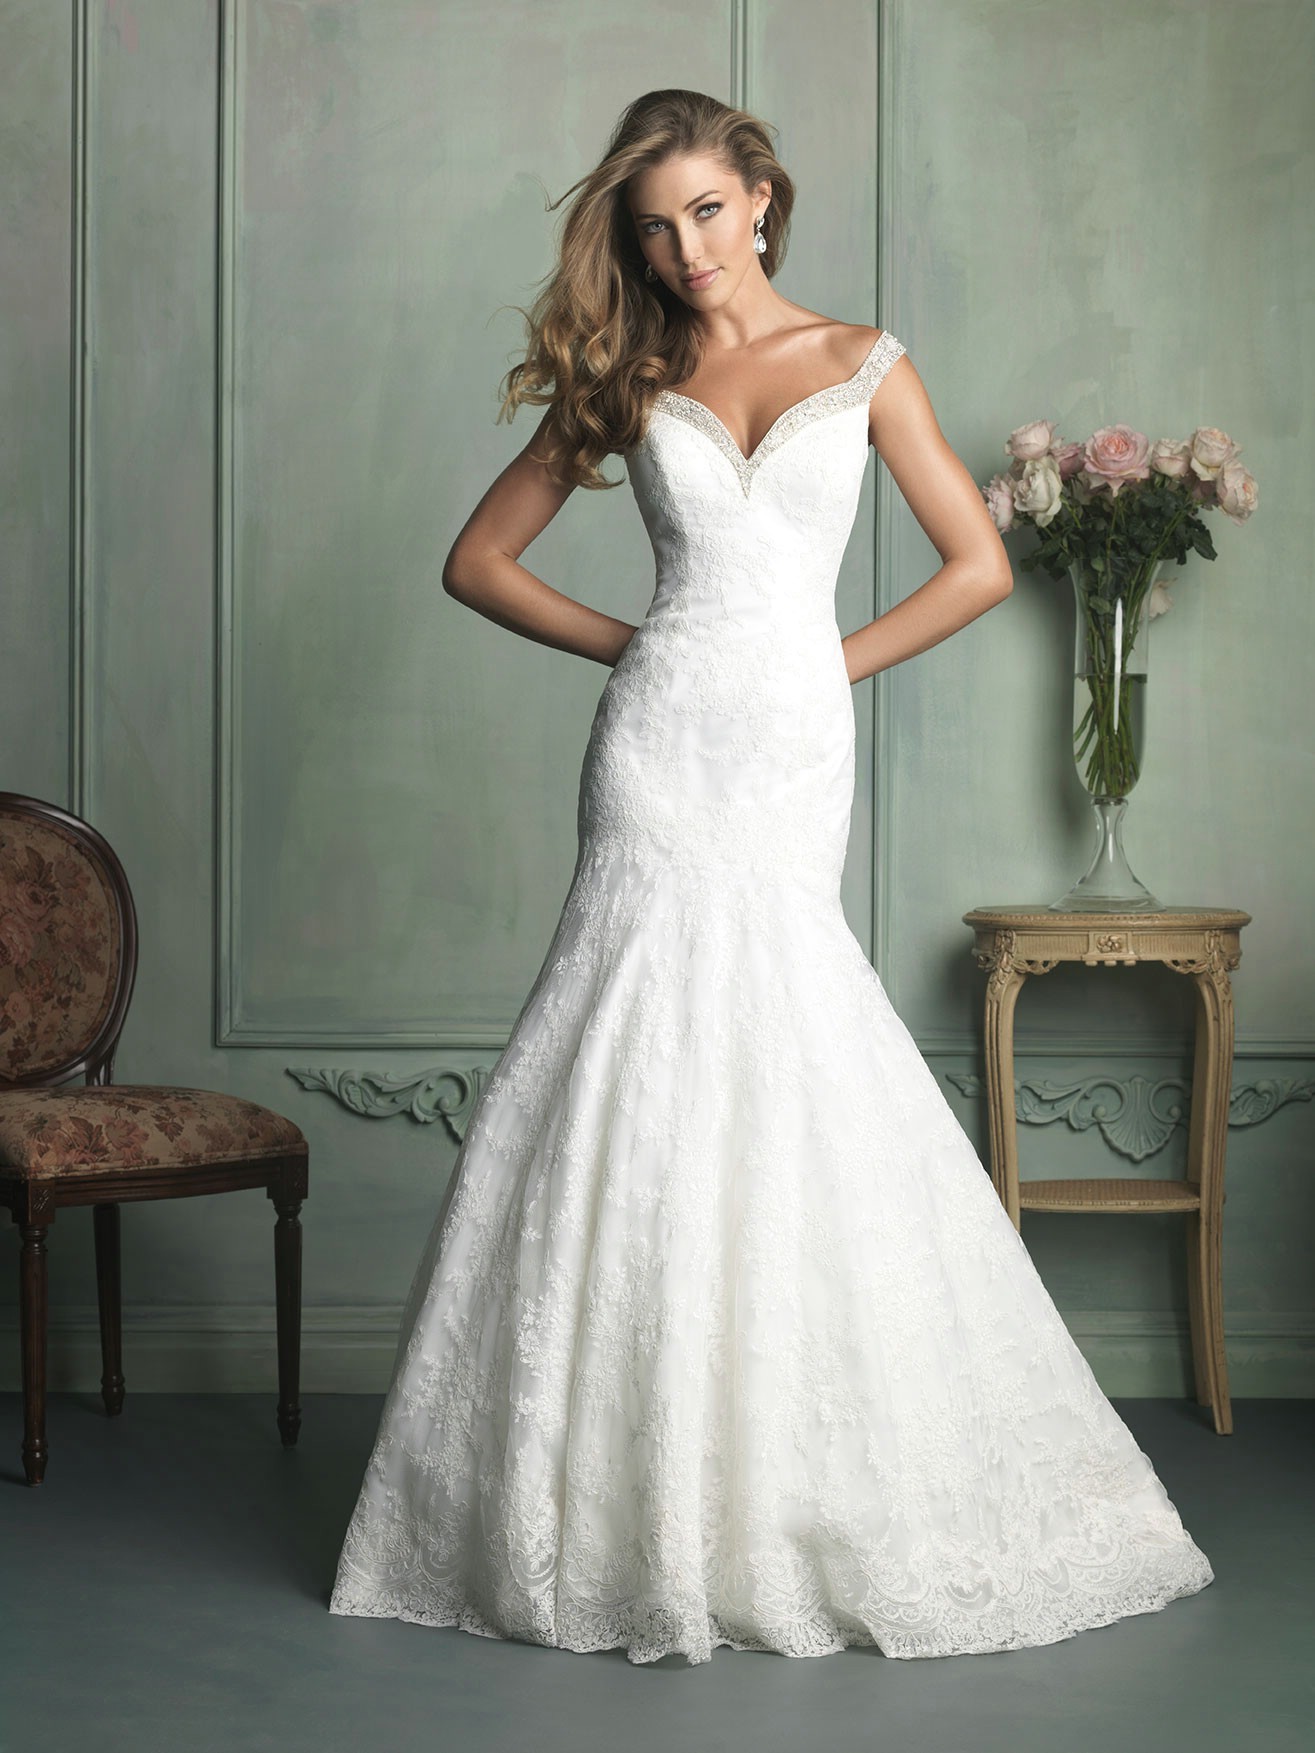 Great Mermaid Wedding Dress of the decade Check it out now ...